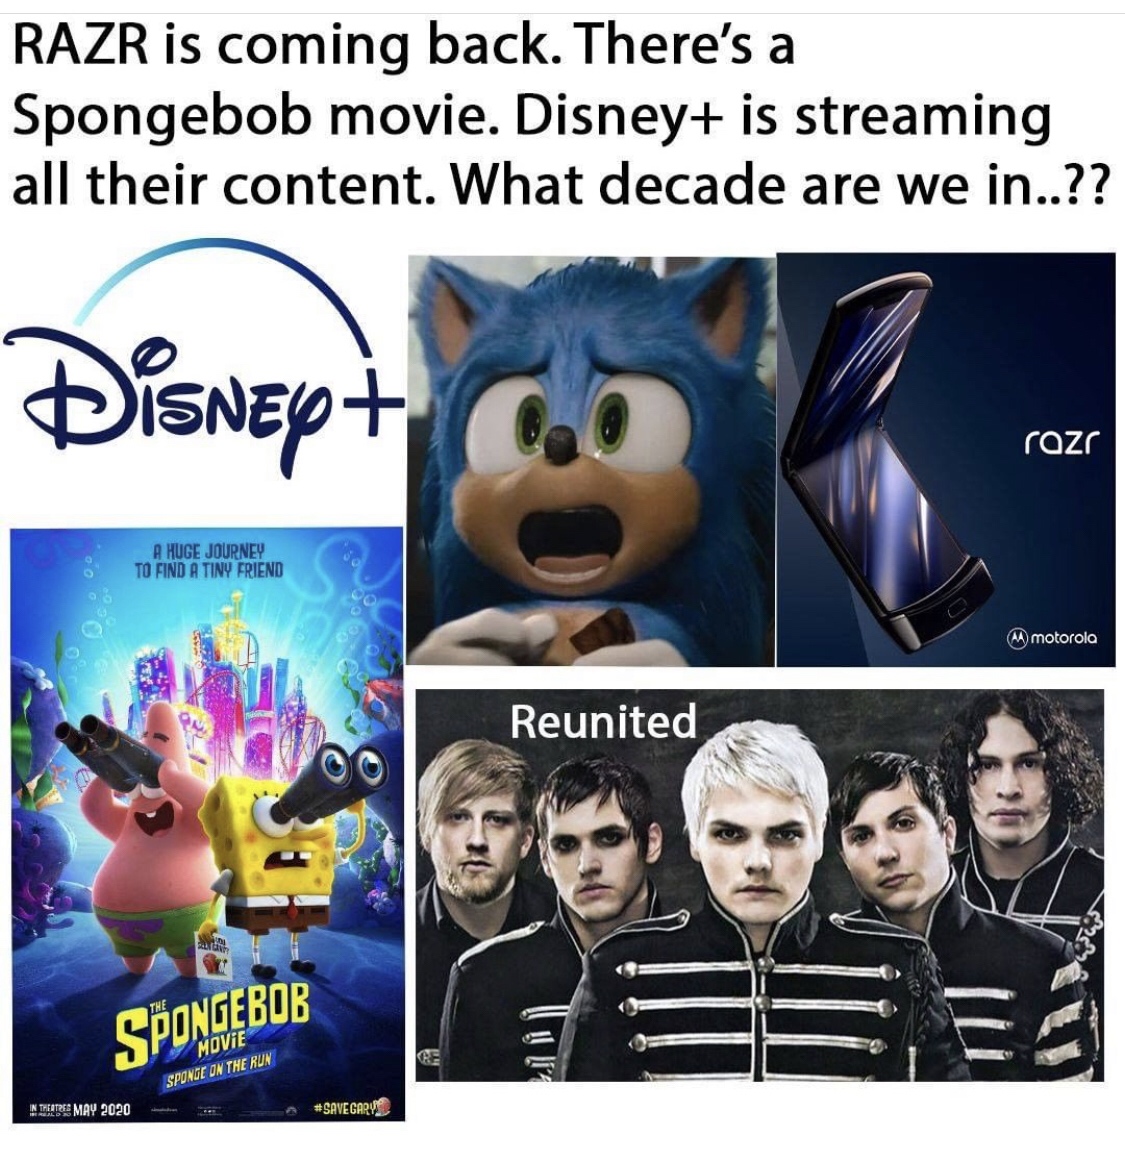 poster - Razr is coming back. There's a Spongebob movie. Disney is streaming all their content. What decade are we in..?? Disney razr He Journe Tutinda Tin Reno A motorola Reunited Spongebob